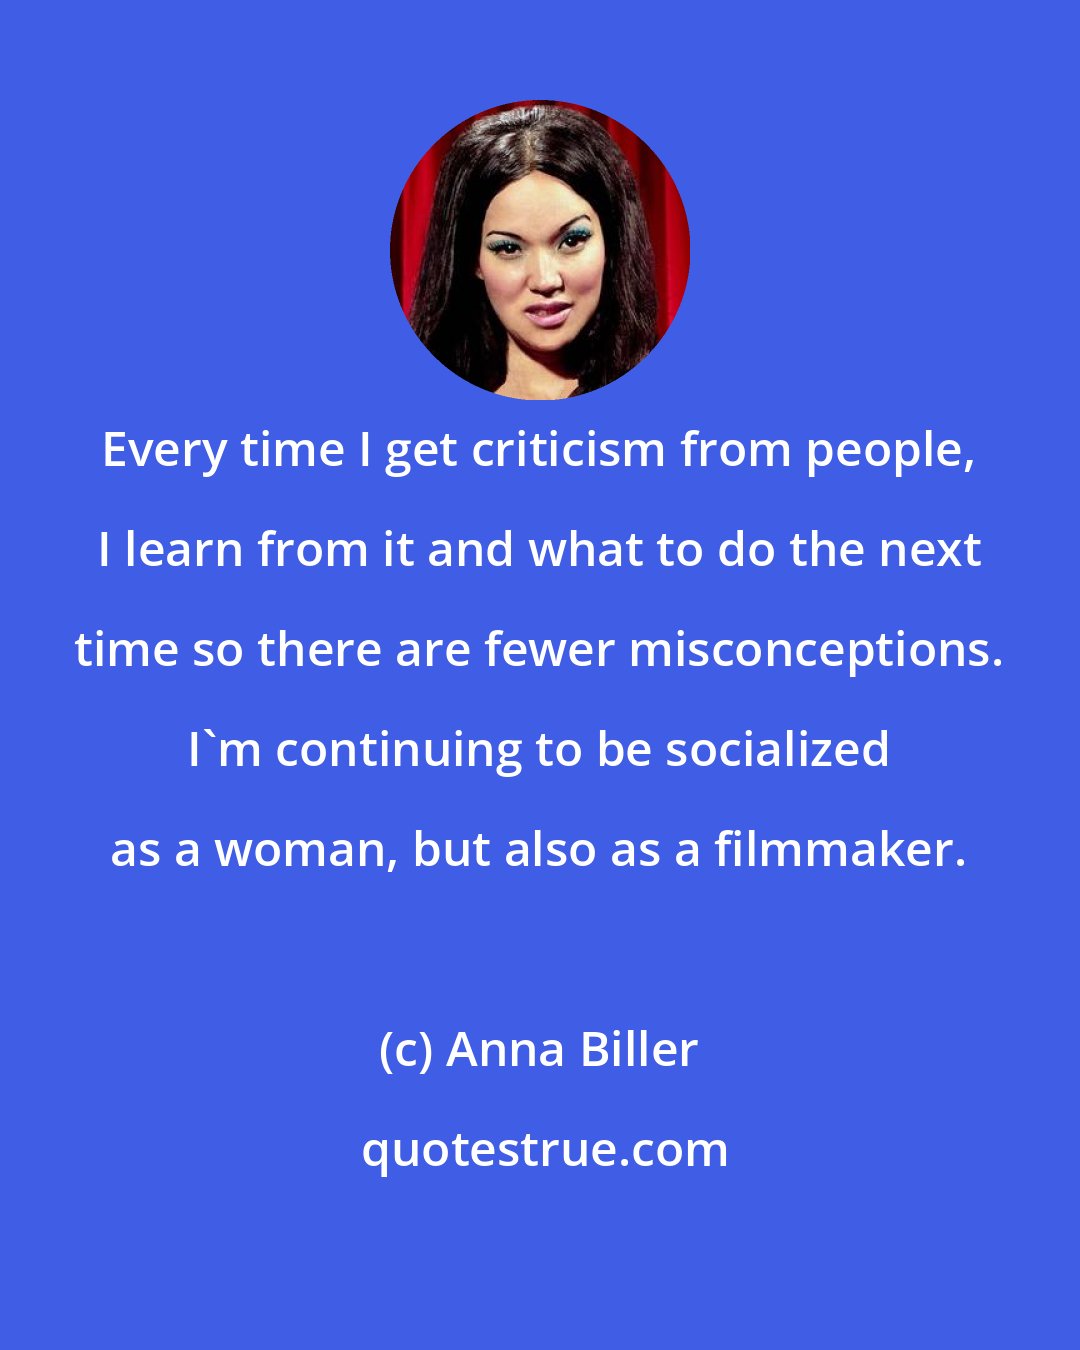 Anna Biller: Every time I get criticism from people, I learn from it and what to do the next time so there are fewer misconceptions. I'm continuing to be socialized as a woman, but also as a filmmaker.